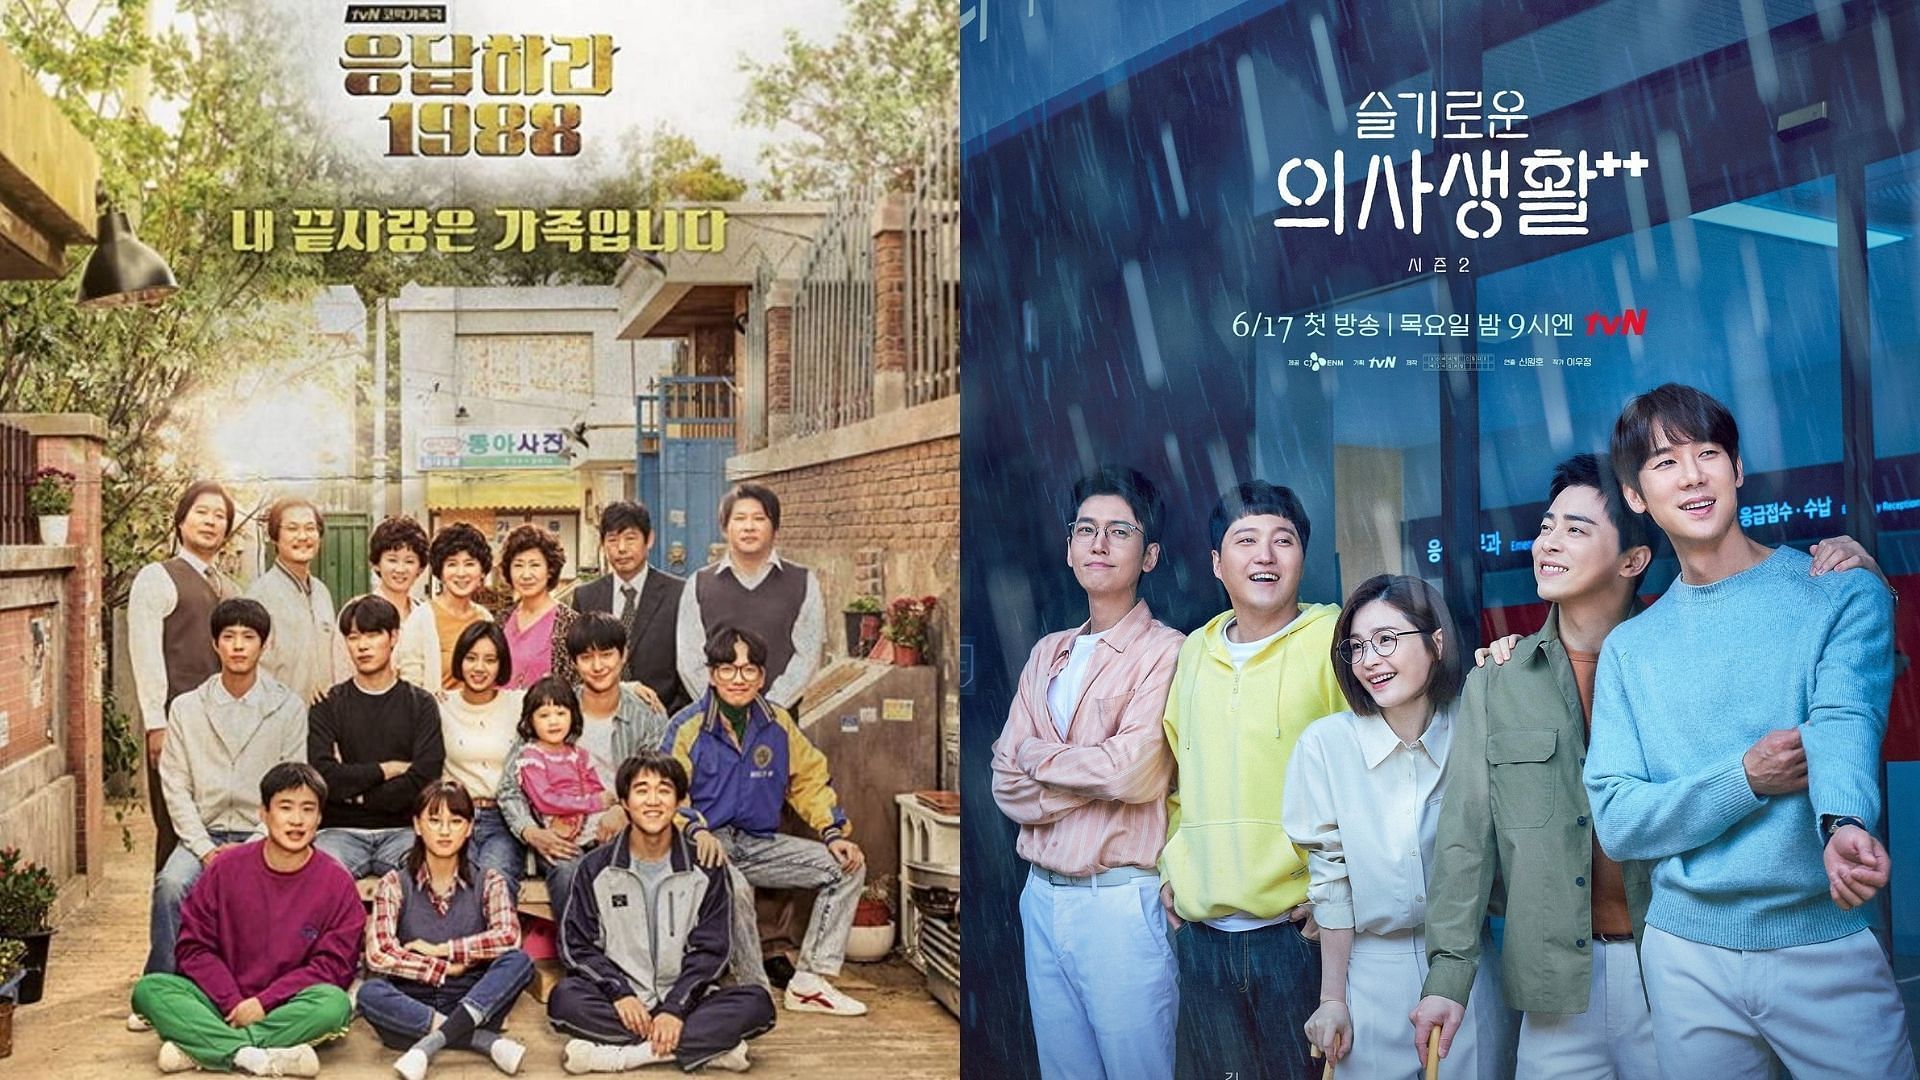 &#039;Reply 1988&#039; and &#039;Hospital Playlist&#039; main posters (Images via IMDb)